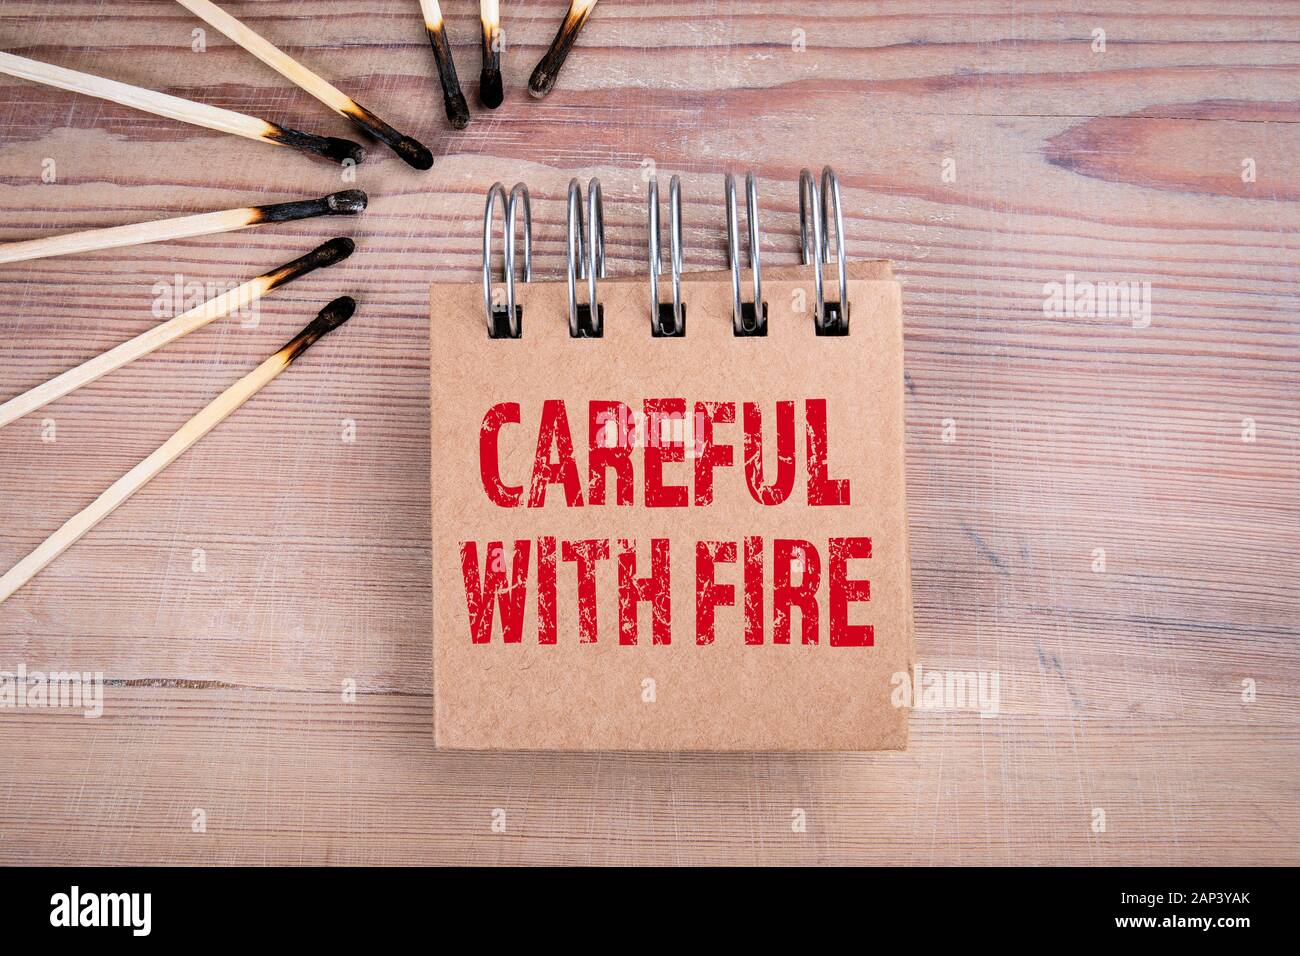 Careful with fire. Fire safety, nature, housing and human behavior concept. Burned matches on wood texture background Stock Photo